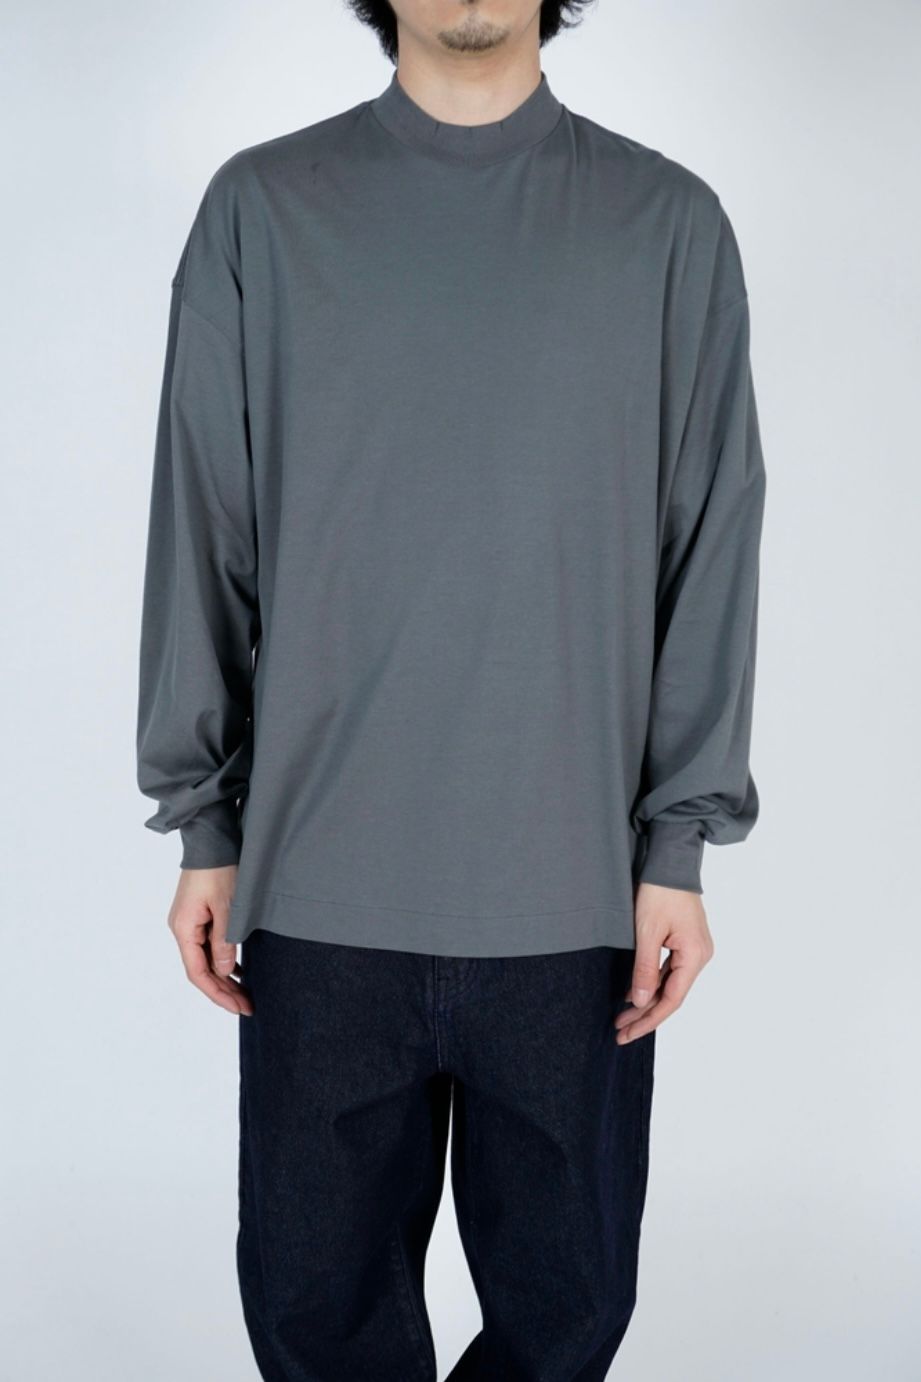 UNIVERSAL PRODUCTS - mock neck l/s t-shirt -gray-22aw | asterisk